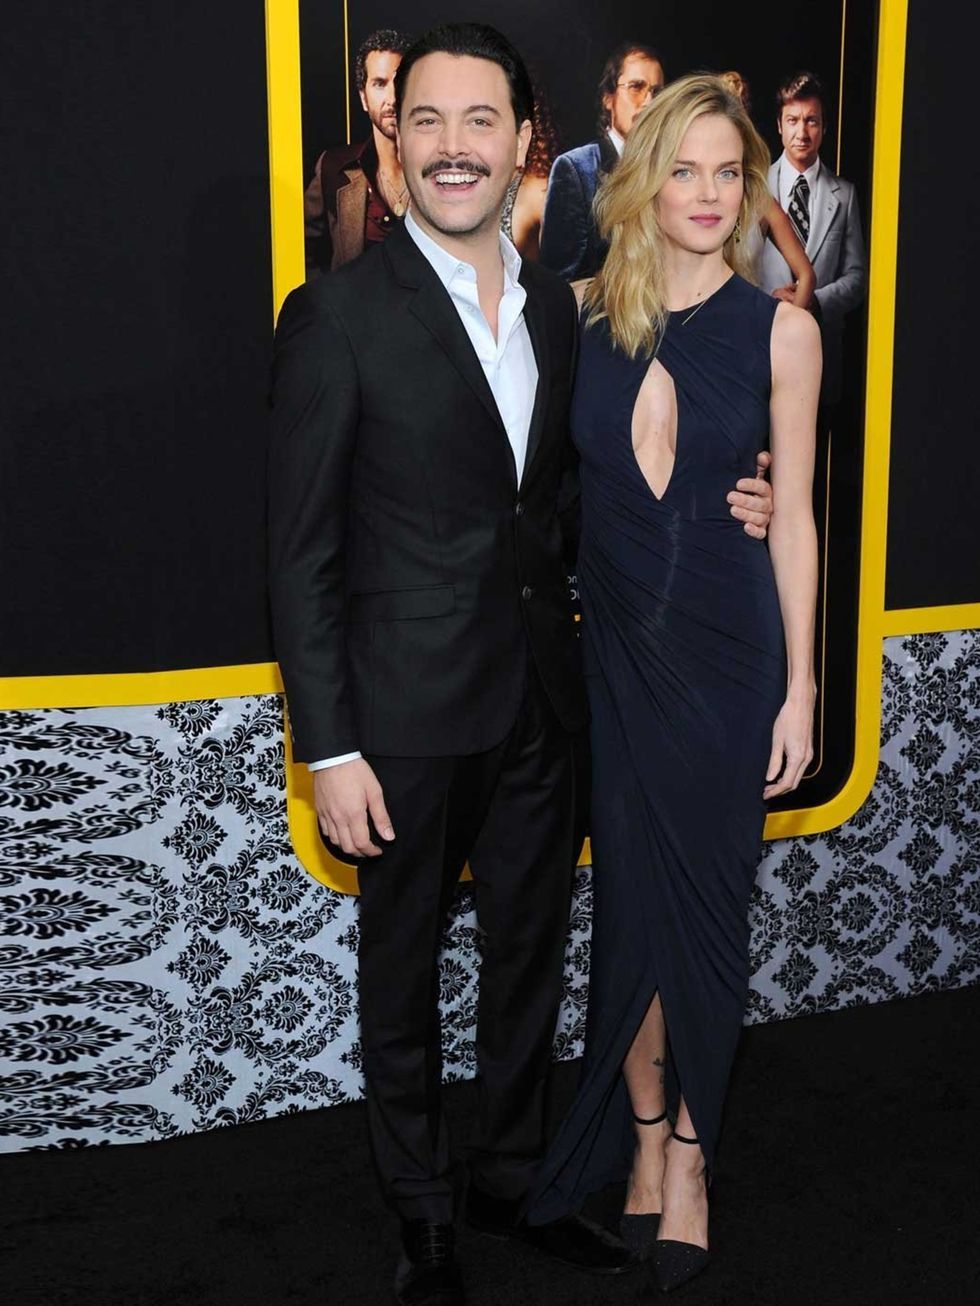 <p>Jack Huston and his model girlfriend Shannon Click welcomed their first child - the divinely monikered Sage Lavinia - into the world in April.</p><p><a href="http://www.elleuk.com/star-style/celebrity-fashion-trends/pop-culture-moments-2013-miley-cyrus